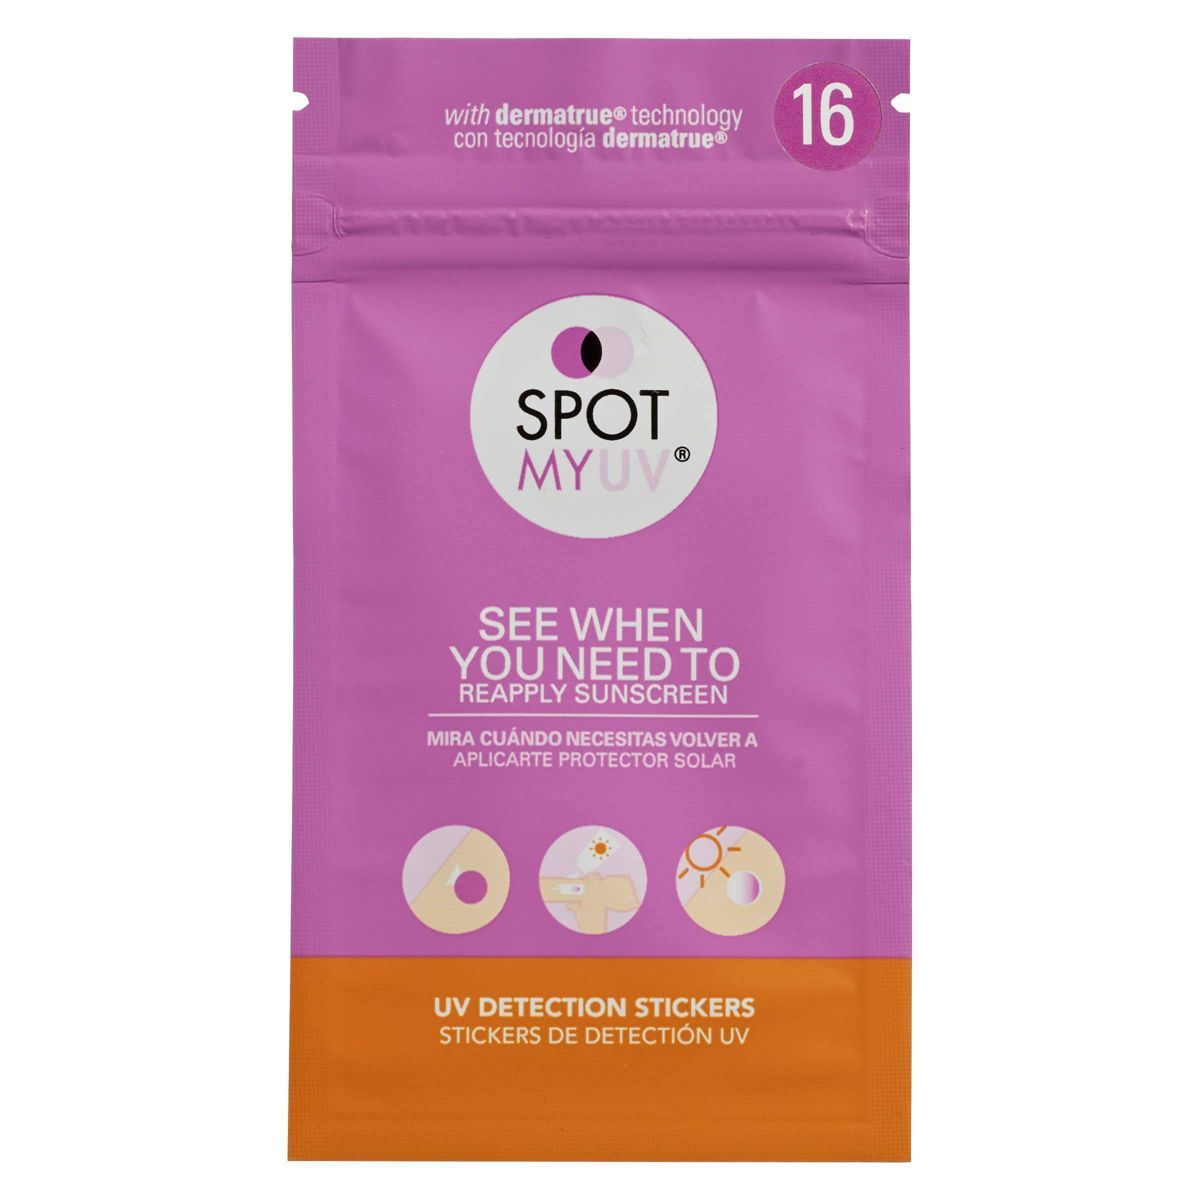 SPOTMYUV UV Detection Stickers for Sunscreen with Patented Dermatrue - 16pk | Target